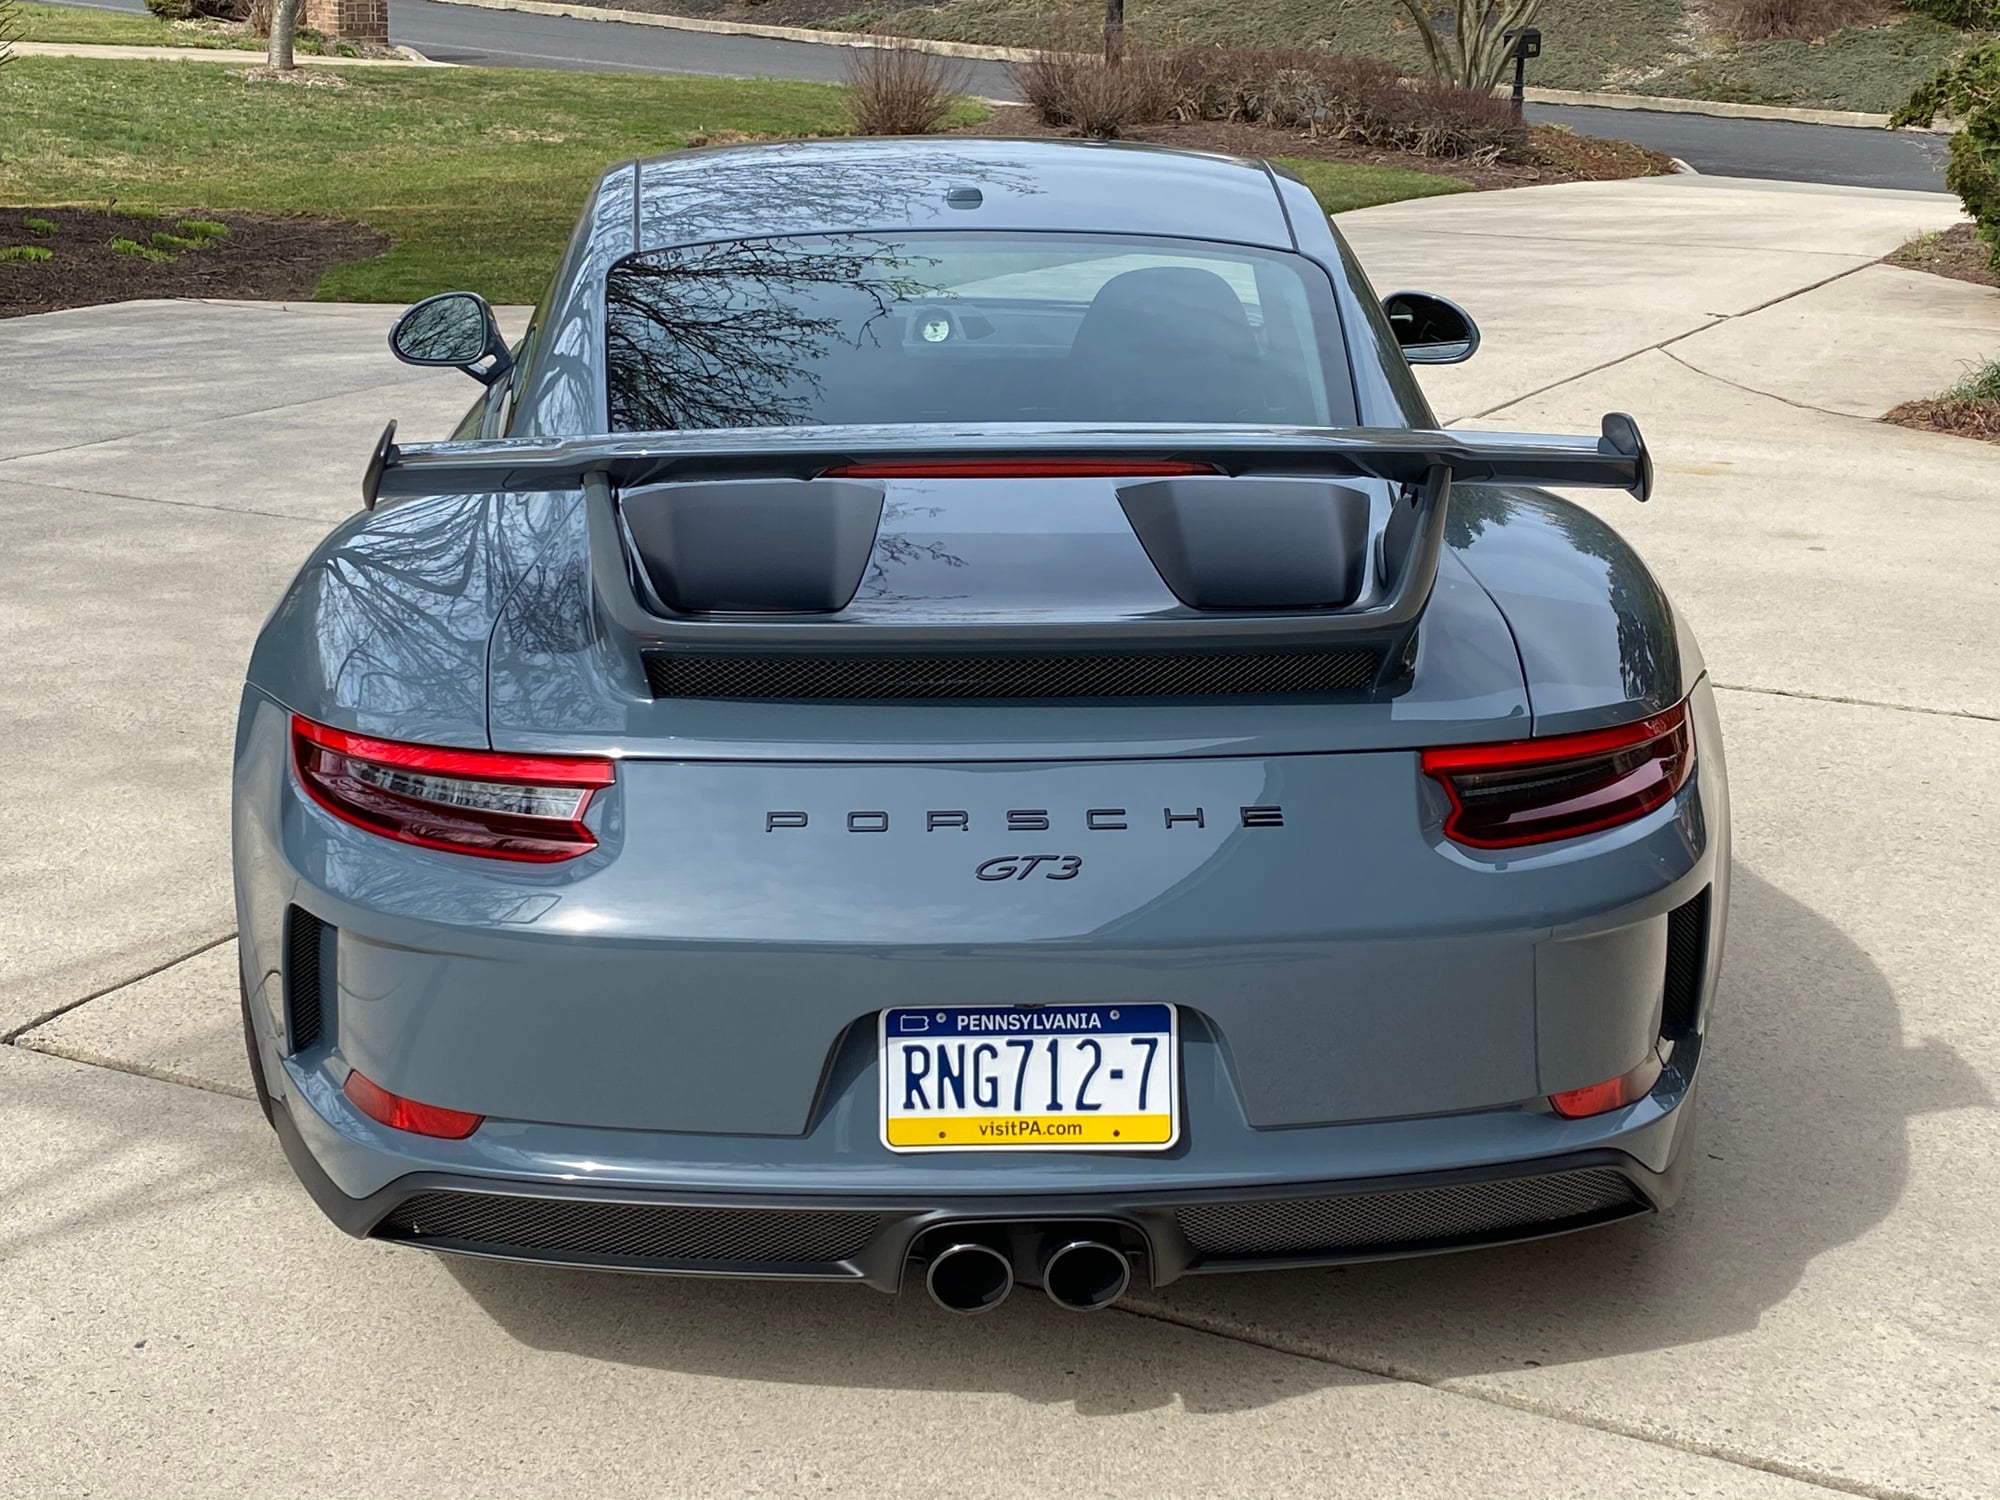 2018 Porsche GT3 - 2018 GT3 (991.2) Graphite Blue Metallic Nicely optioned - Used - VIN WP0AC2A96JS174360 - 3,050 Miles - 6 cyl - 2WD - Automatic - Coupe - Mechanicsburg, PA 17050, United States